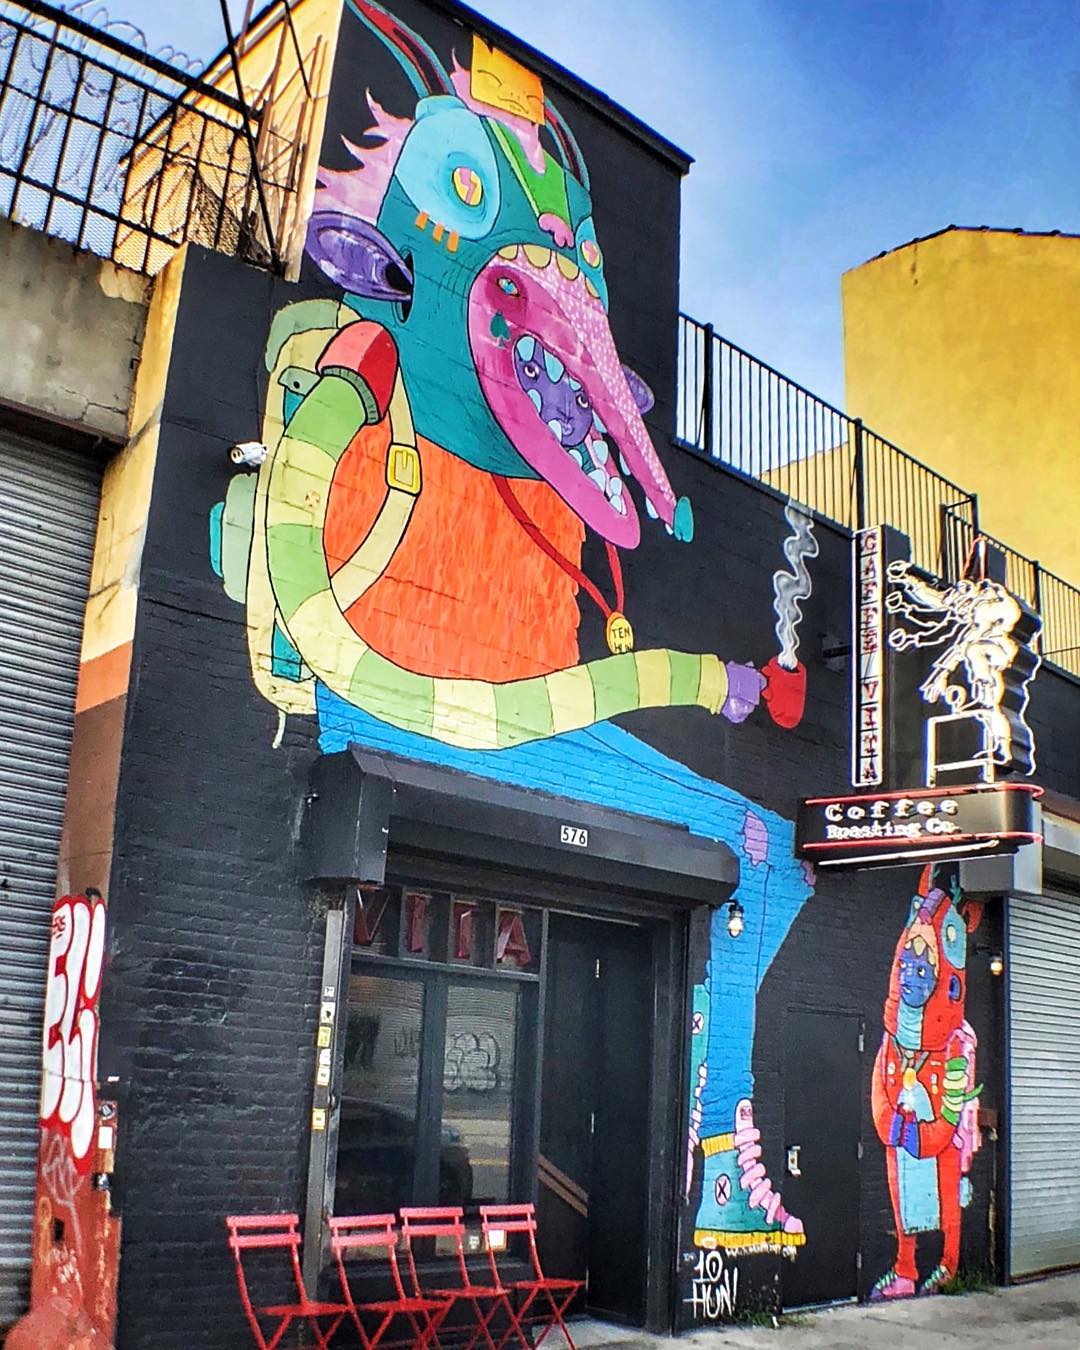 Colorful artwork on the side of a building Photo by Instagram user @walkinggirlnyc